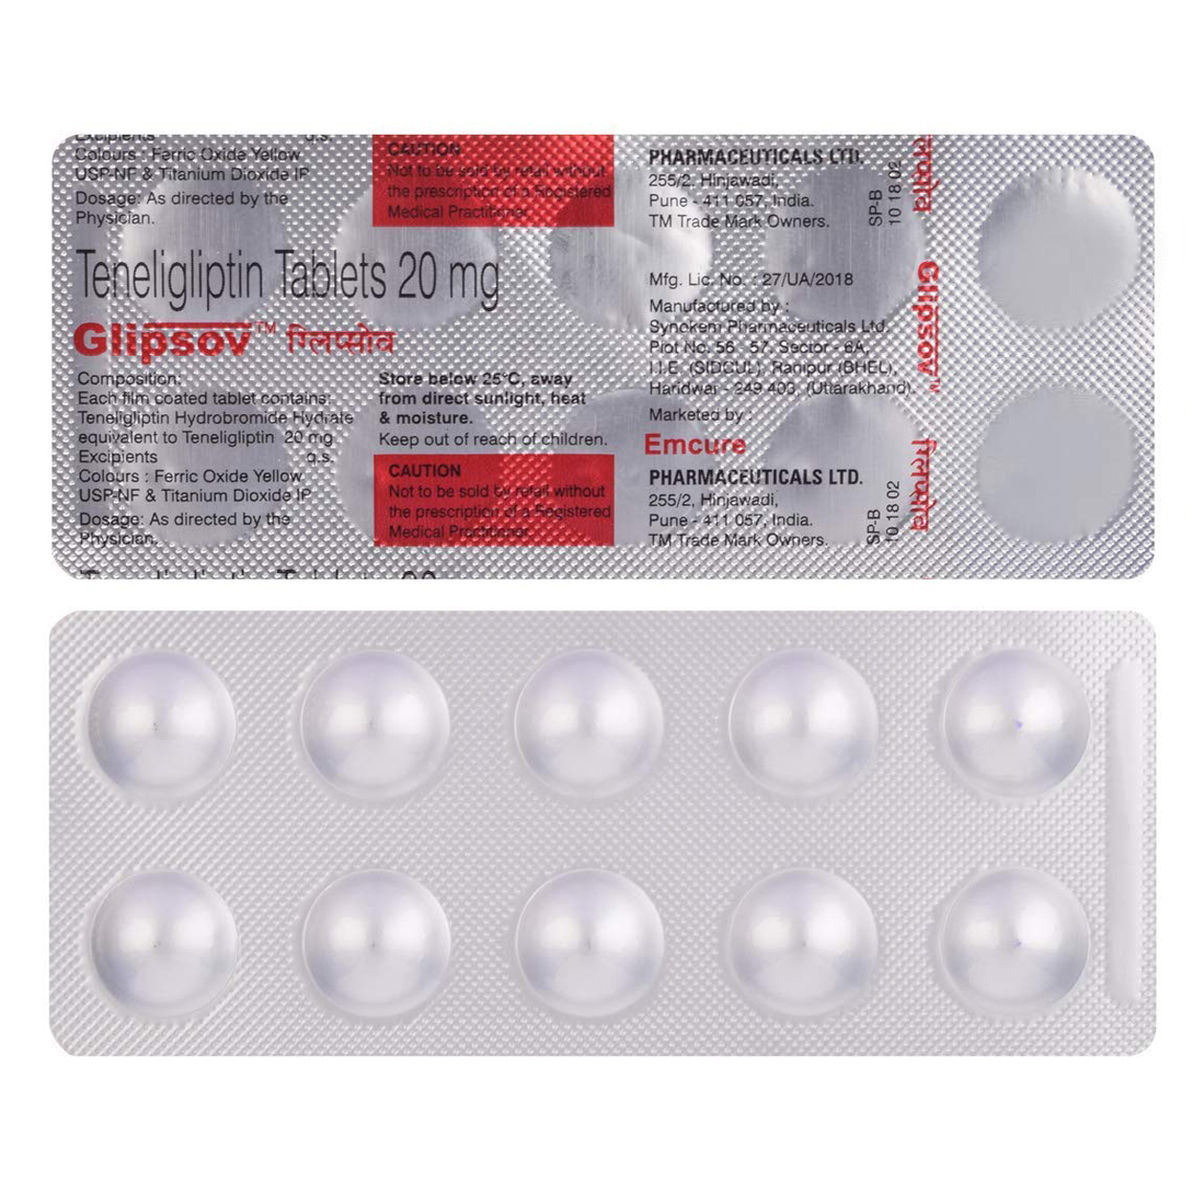 GLIPSOV 20MG TABLET 10'S , Pack of 10 TABLETS